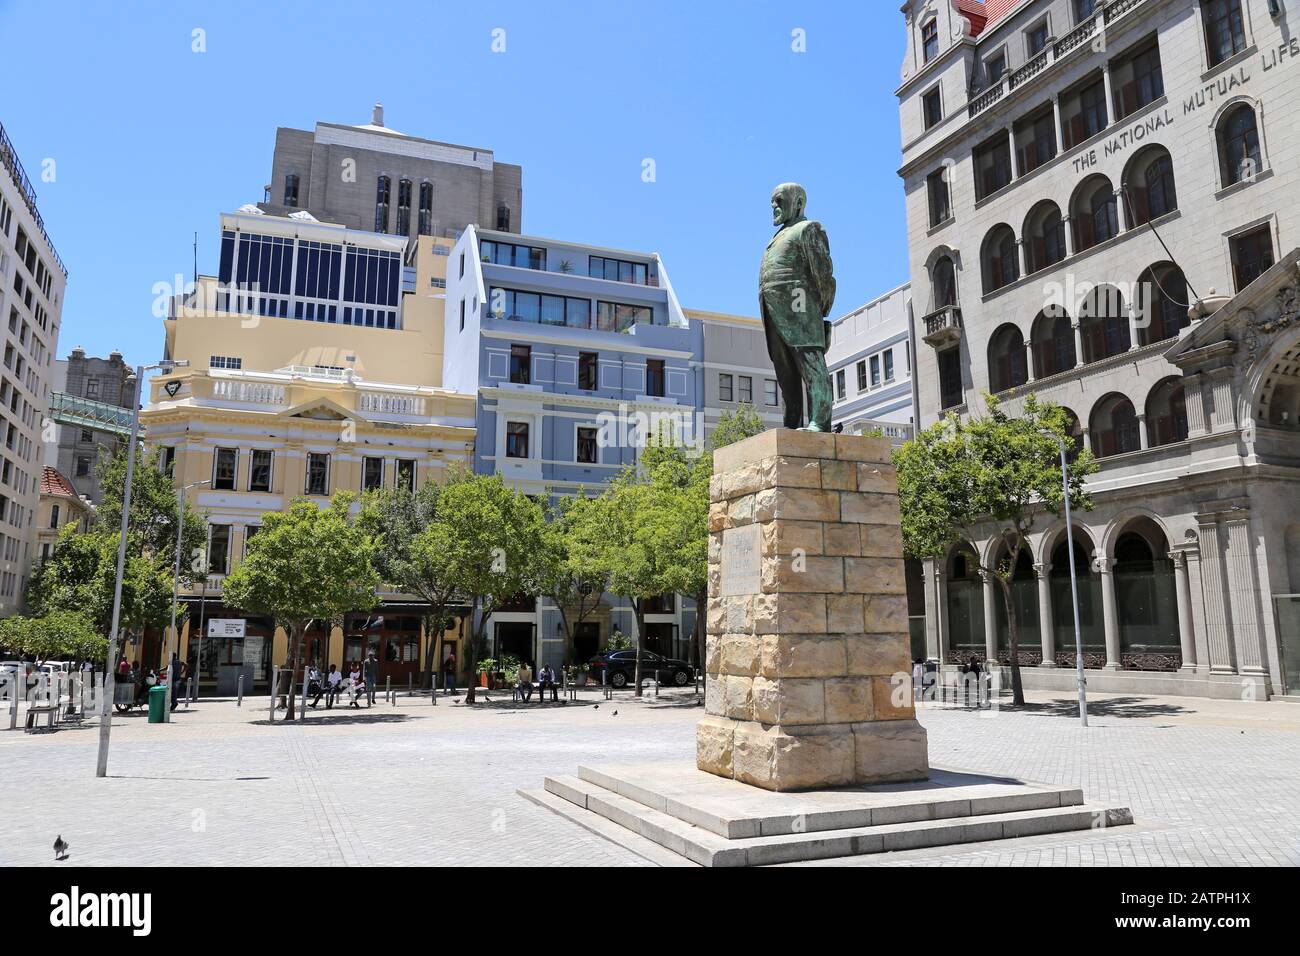 Jan Hendrik Hofmeyr statue and Church Square, Parliament Street, CBD, Cape Town, Table Bay, Western Cape Province, South Africa, Africa Stock Photo